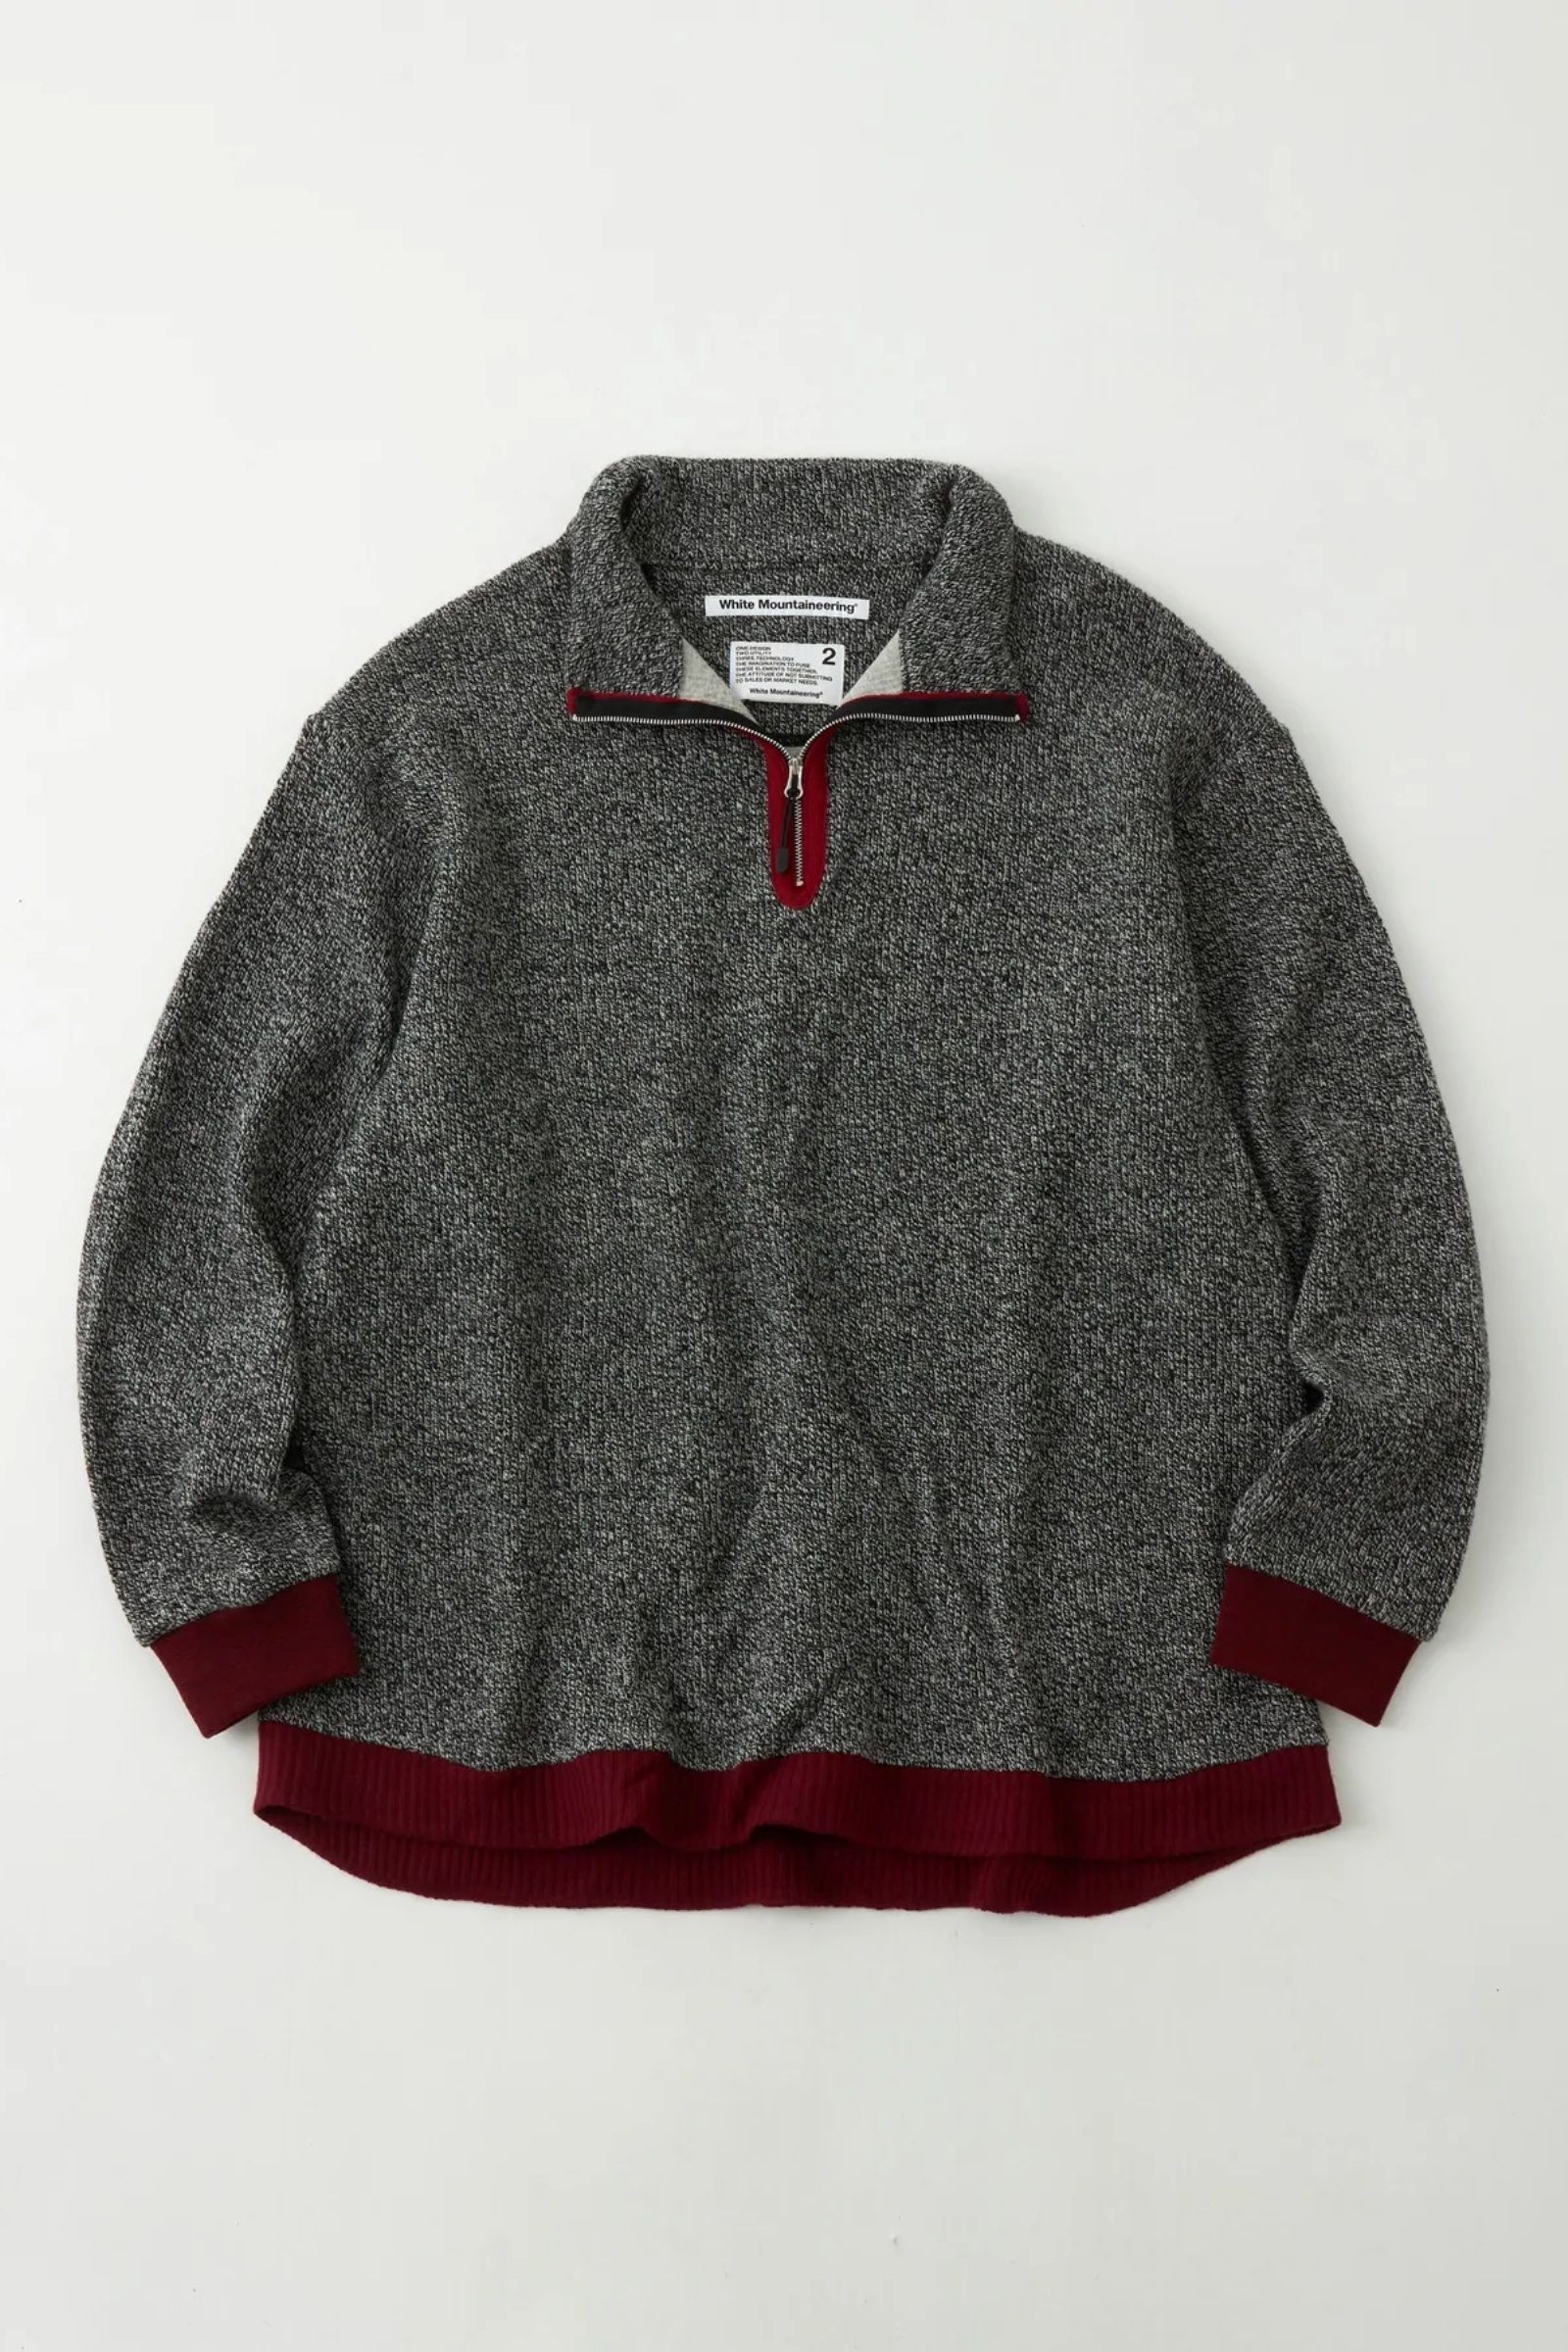 White Mountaineering - half zip knit pullover -charcoal- 22aw men